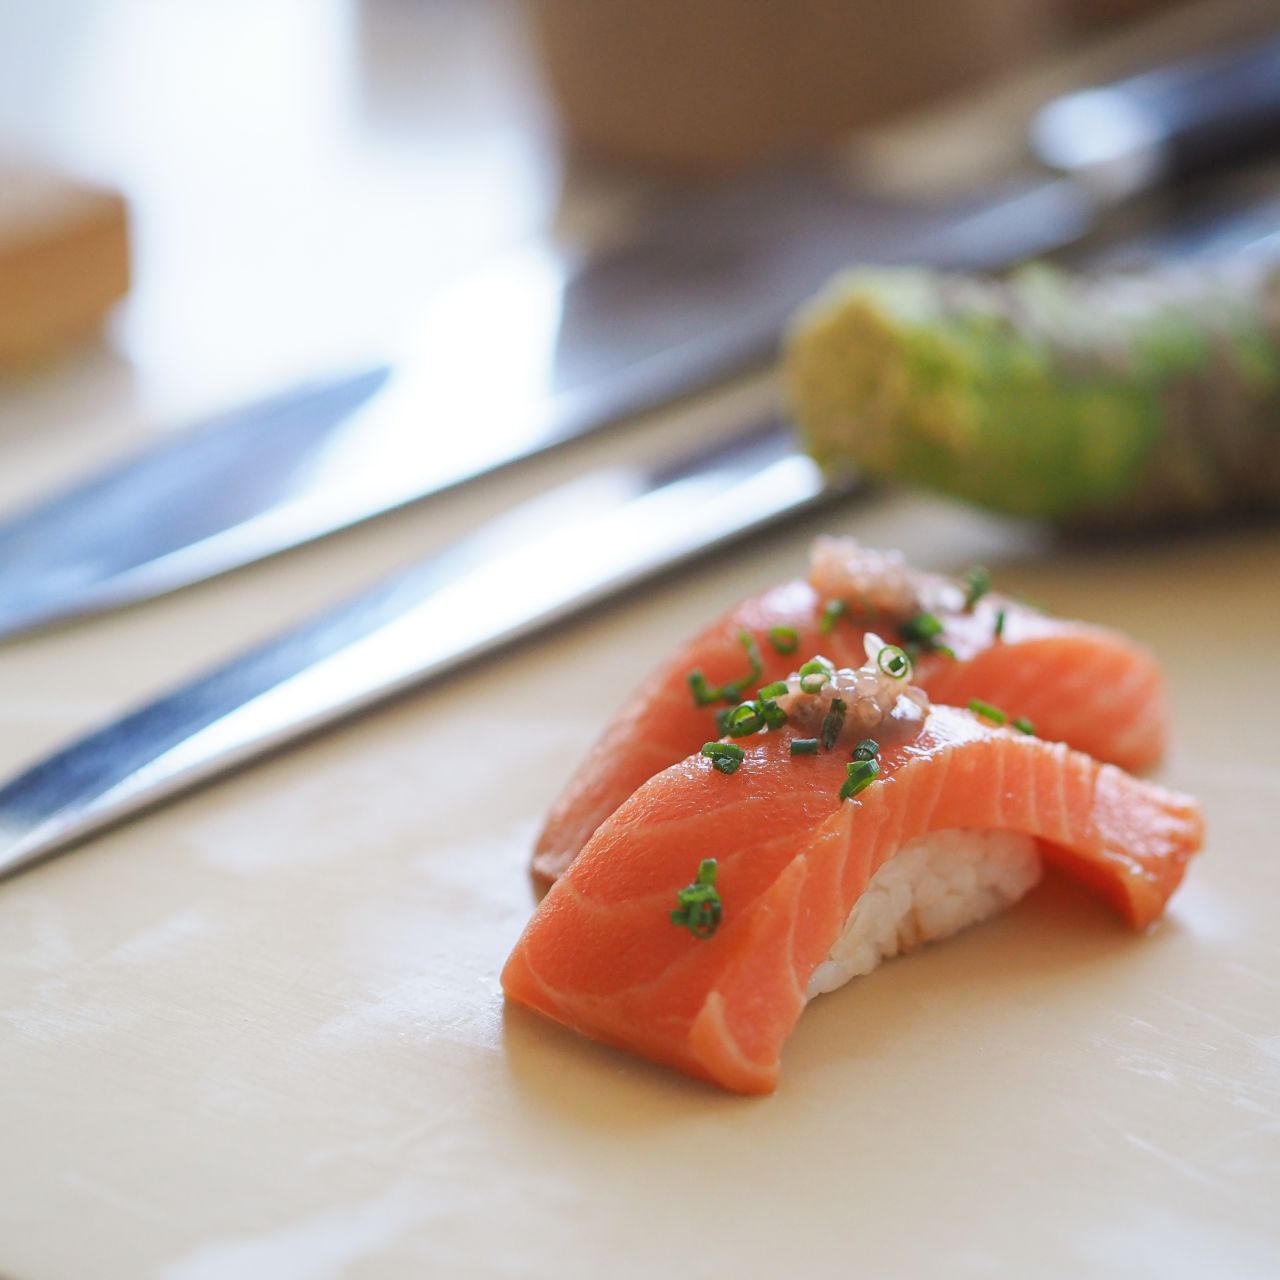 "Lab-grown" meat doesn't just stop at beef or chicken. California-based Wildtype creates cultivated seafood such as <a href="https://edition.cnn.com/2022/04/07/business/cultivated-salmon-wildtype-climate-scn-hnk-spc-intl/index.html" target="_blank">salmon</a> (pictured). Hoping to be the first company to take a cultivated fish to market, the product could help to combat overfishing and while remaining free of microplastics. 